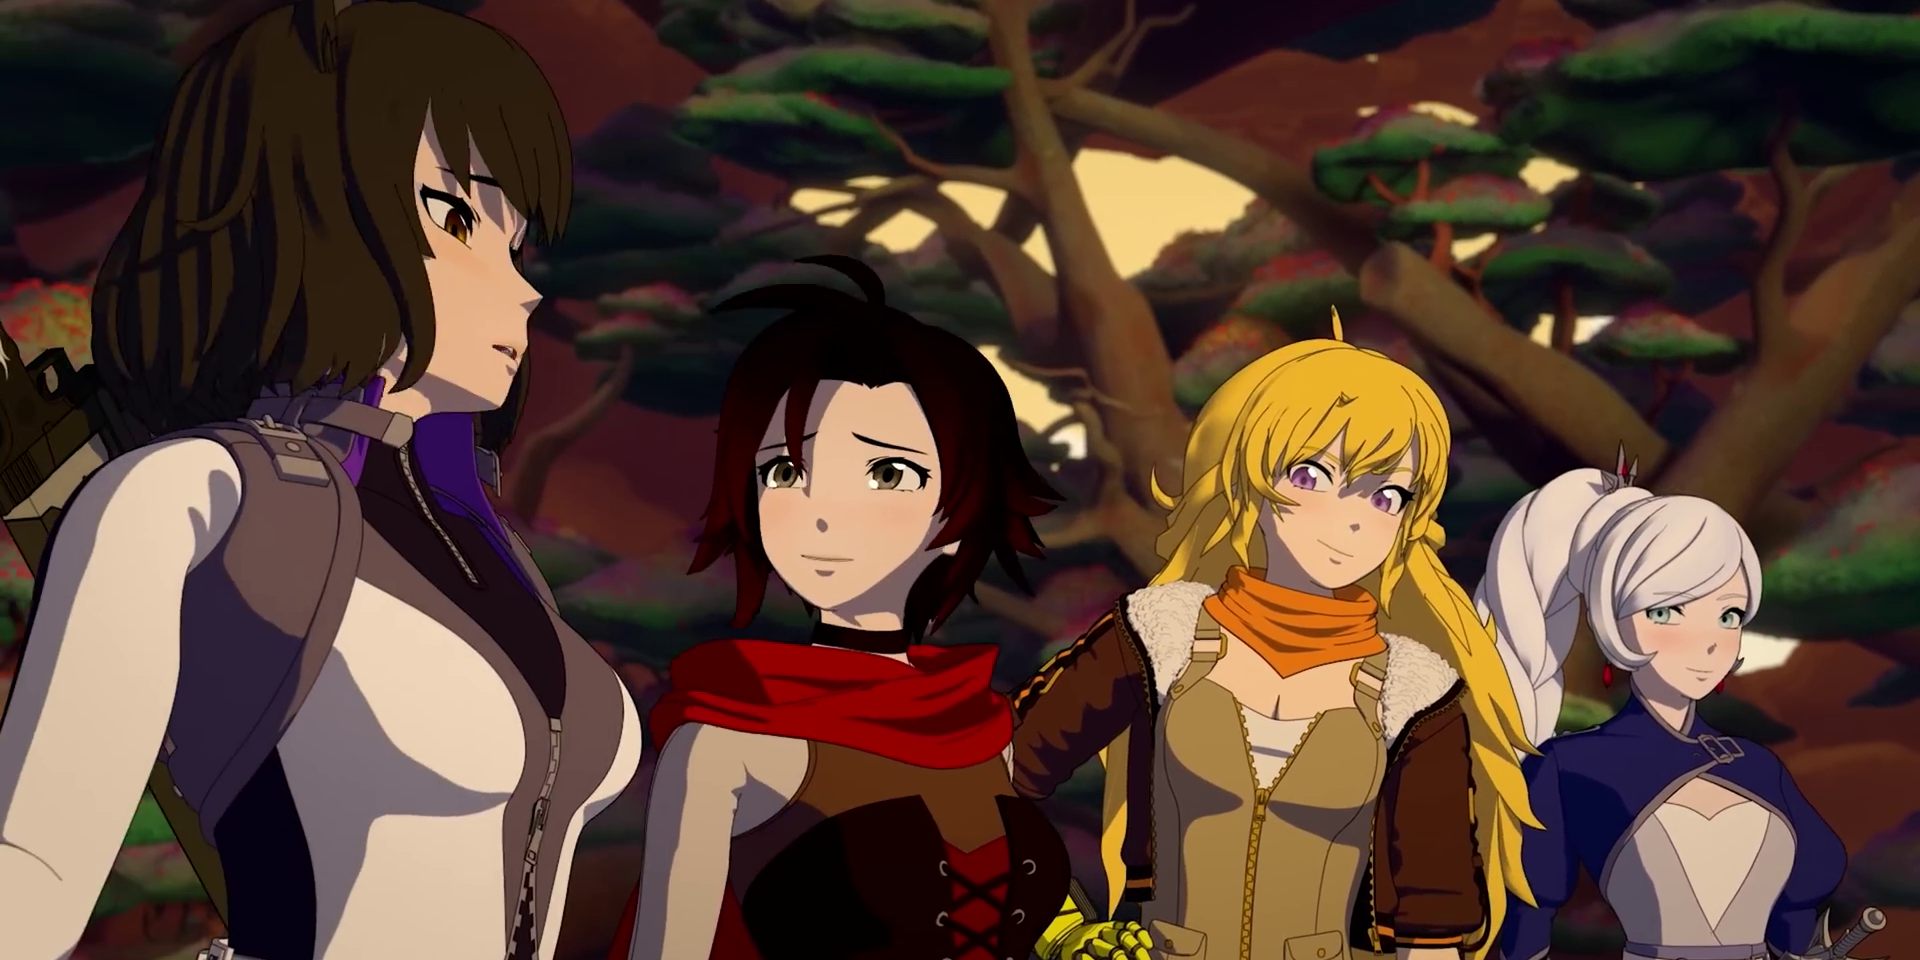 Left to Right: Blake, Ruby, Yang, and Weiss, standing in a row. Image taken from RWBY Volume 9